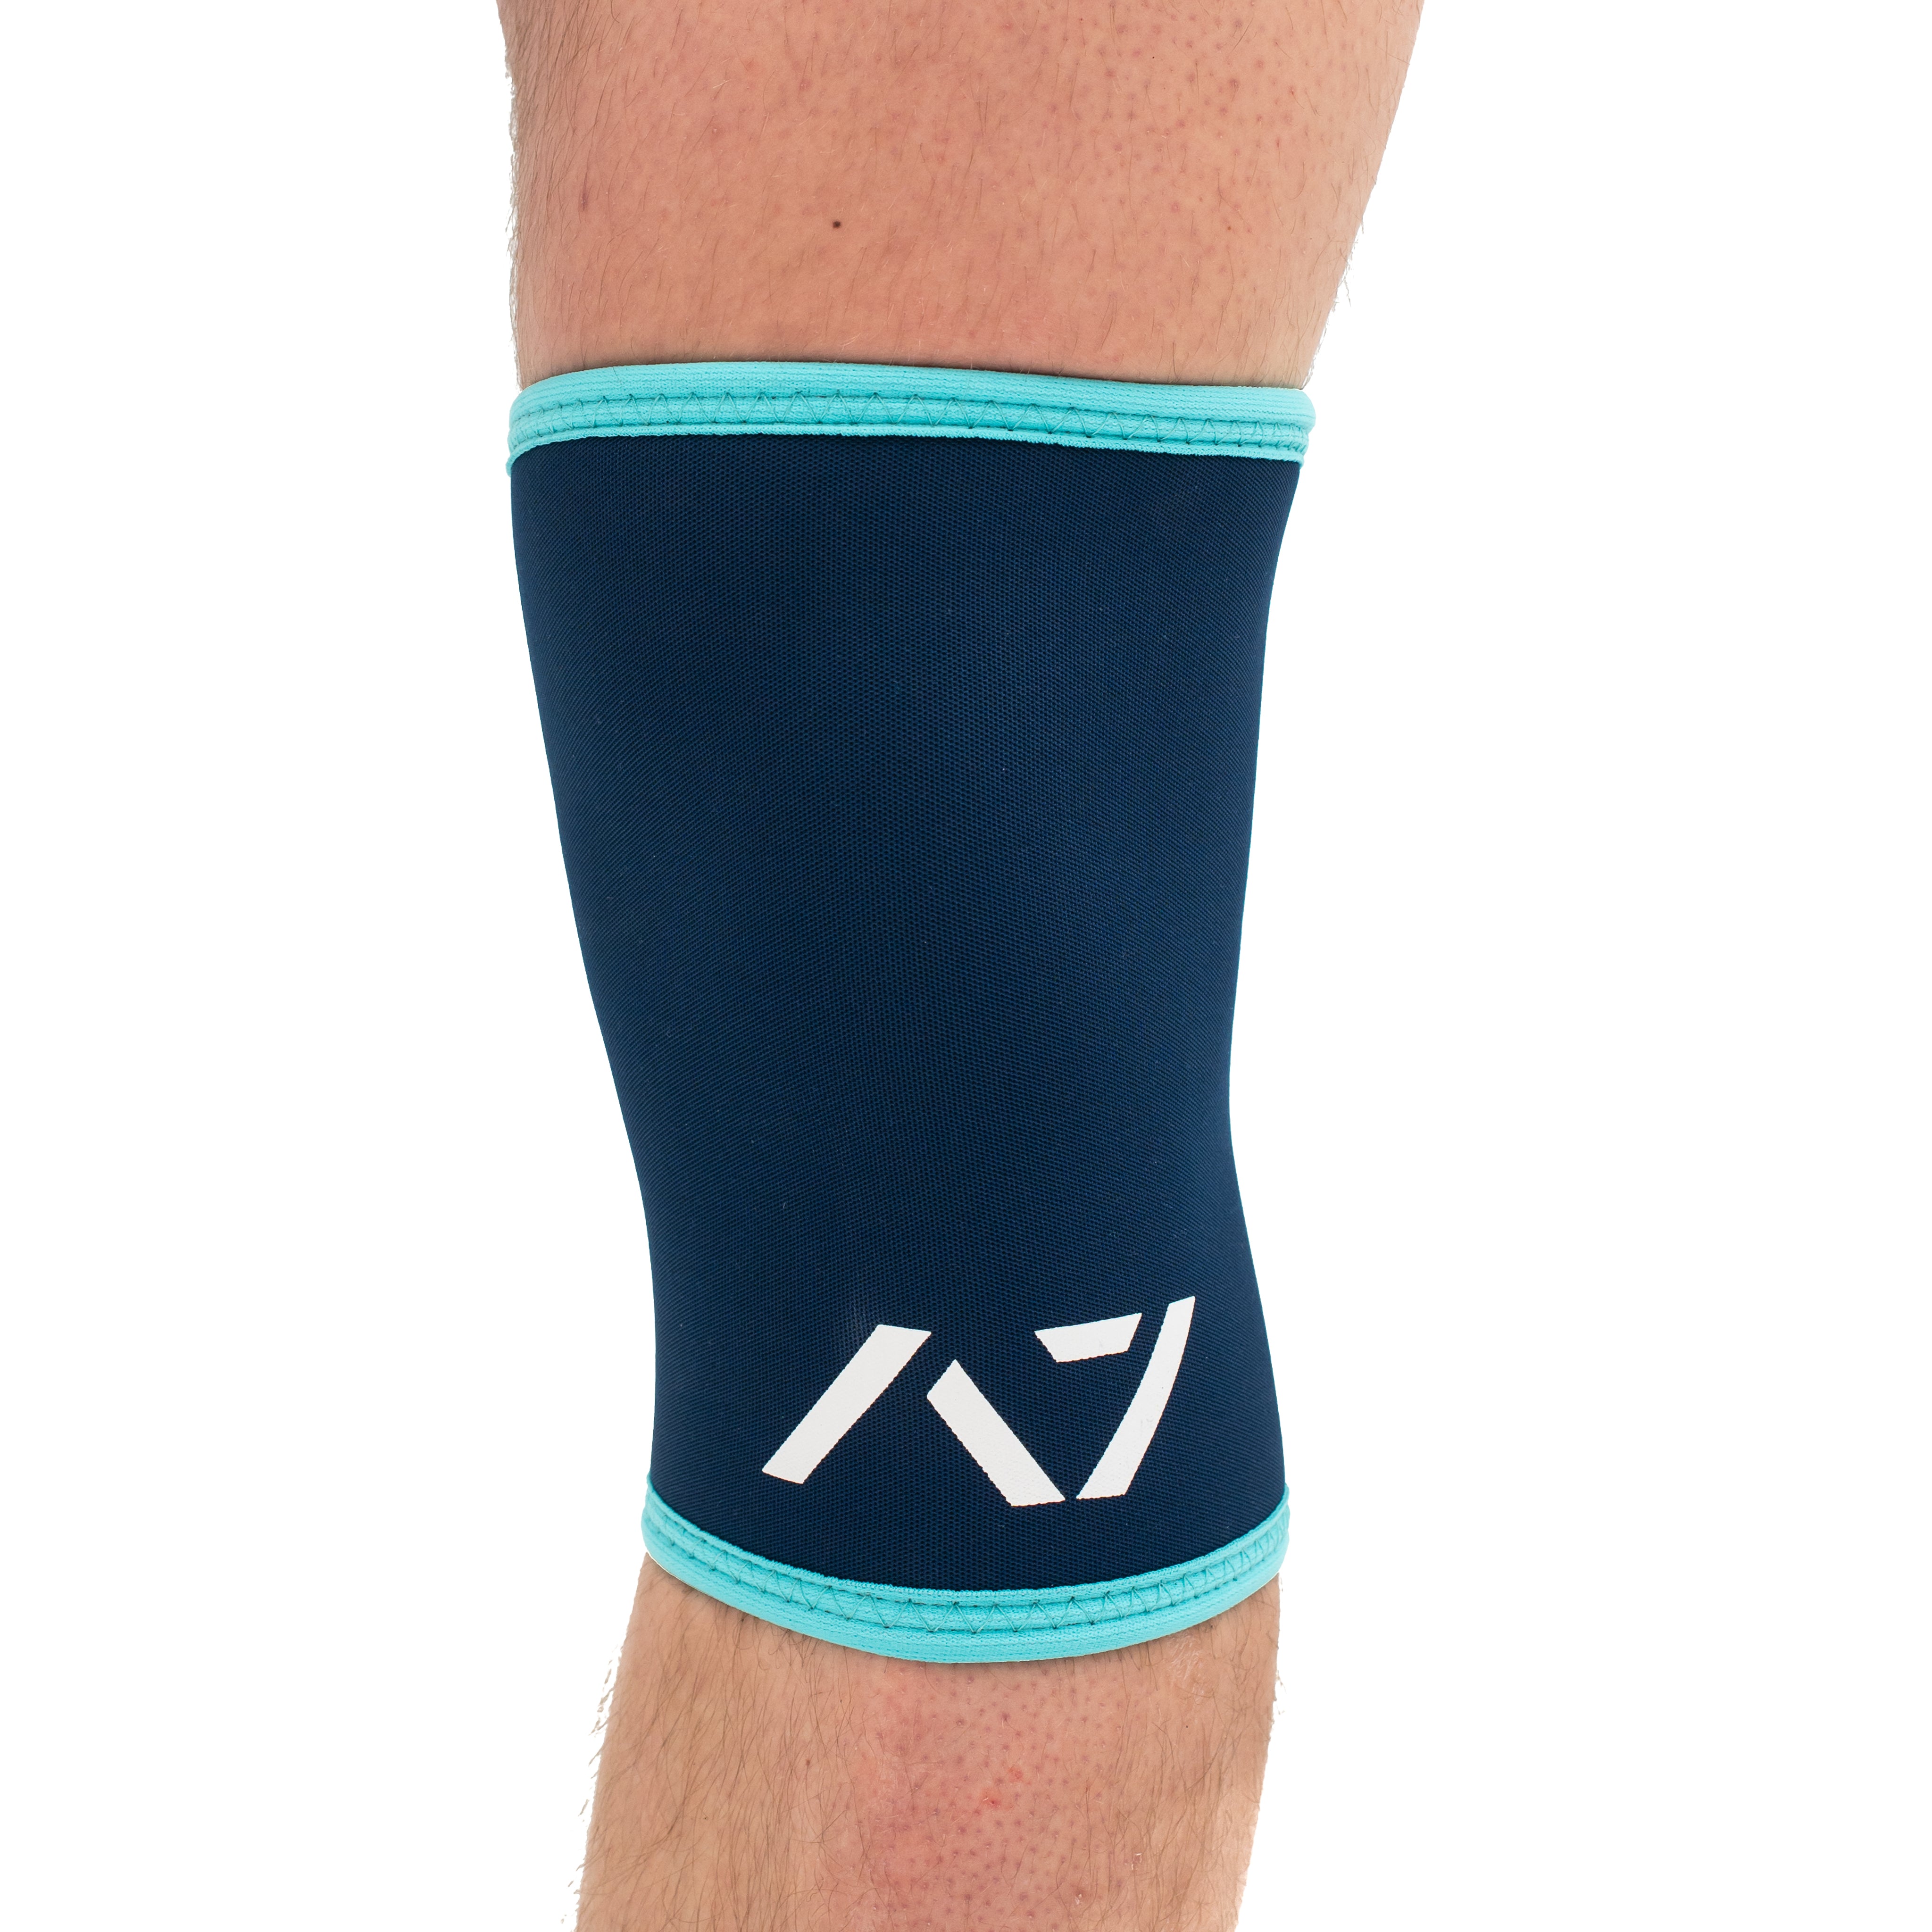 Black CONE Knee Sleeves - IPF Approved  A7 Europe Shipping to EU – A7  EUROPE